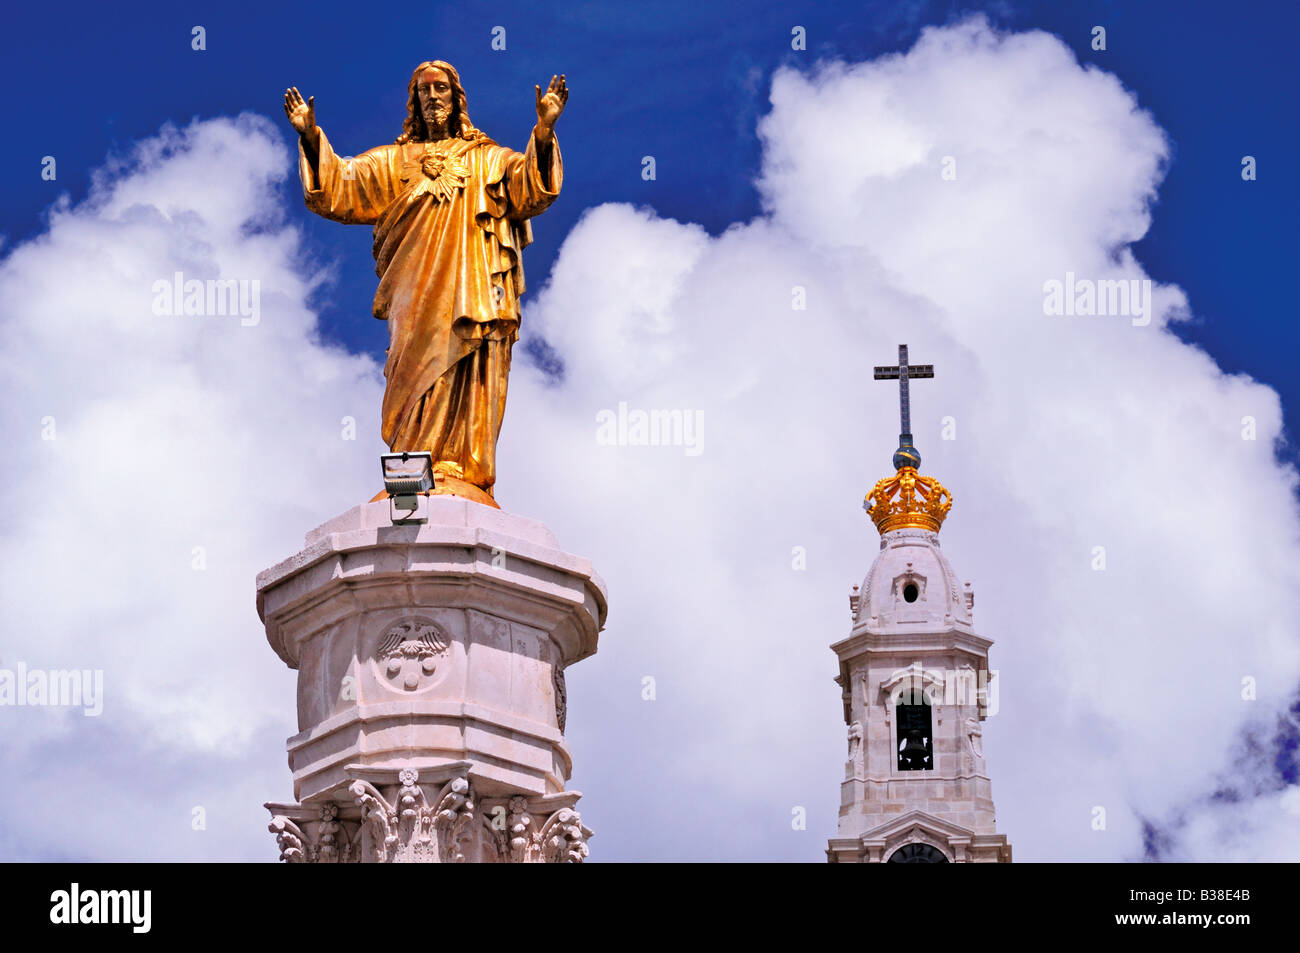 Statue of Christ and tower of the basilica in the clouds, Fatima, Portugal Stock Photo